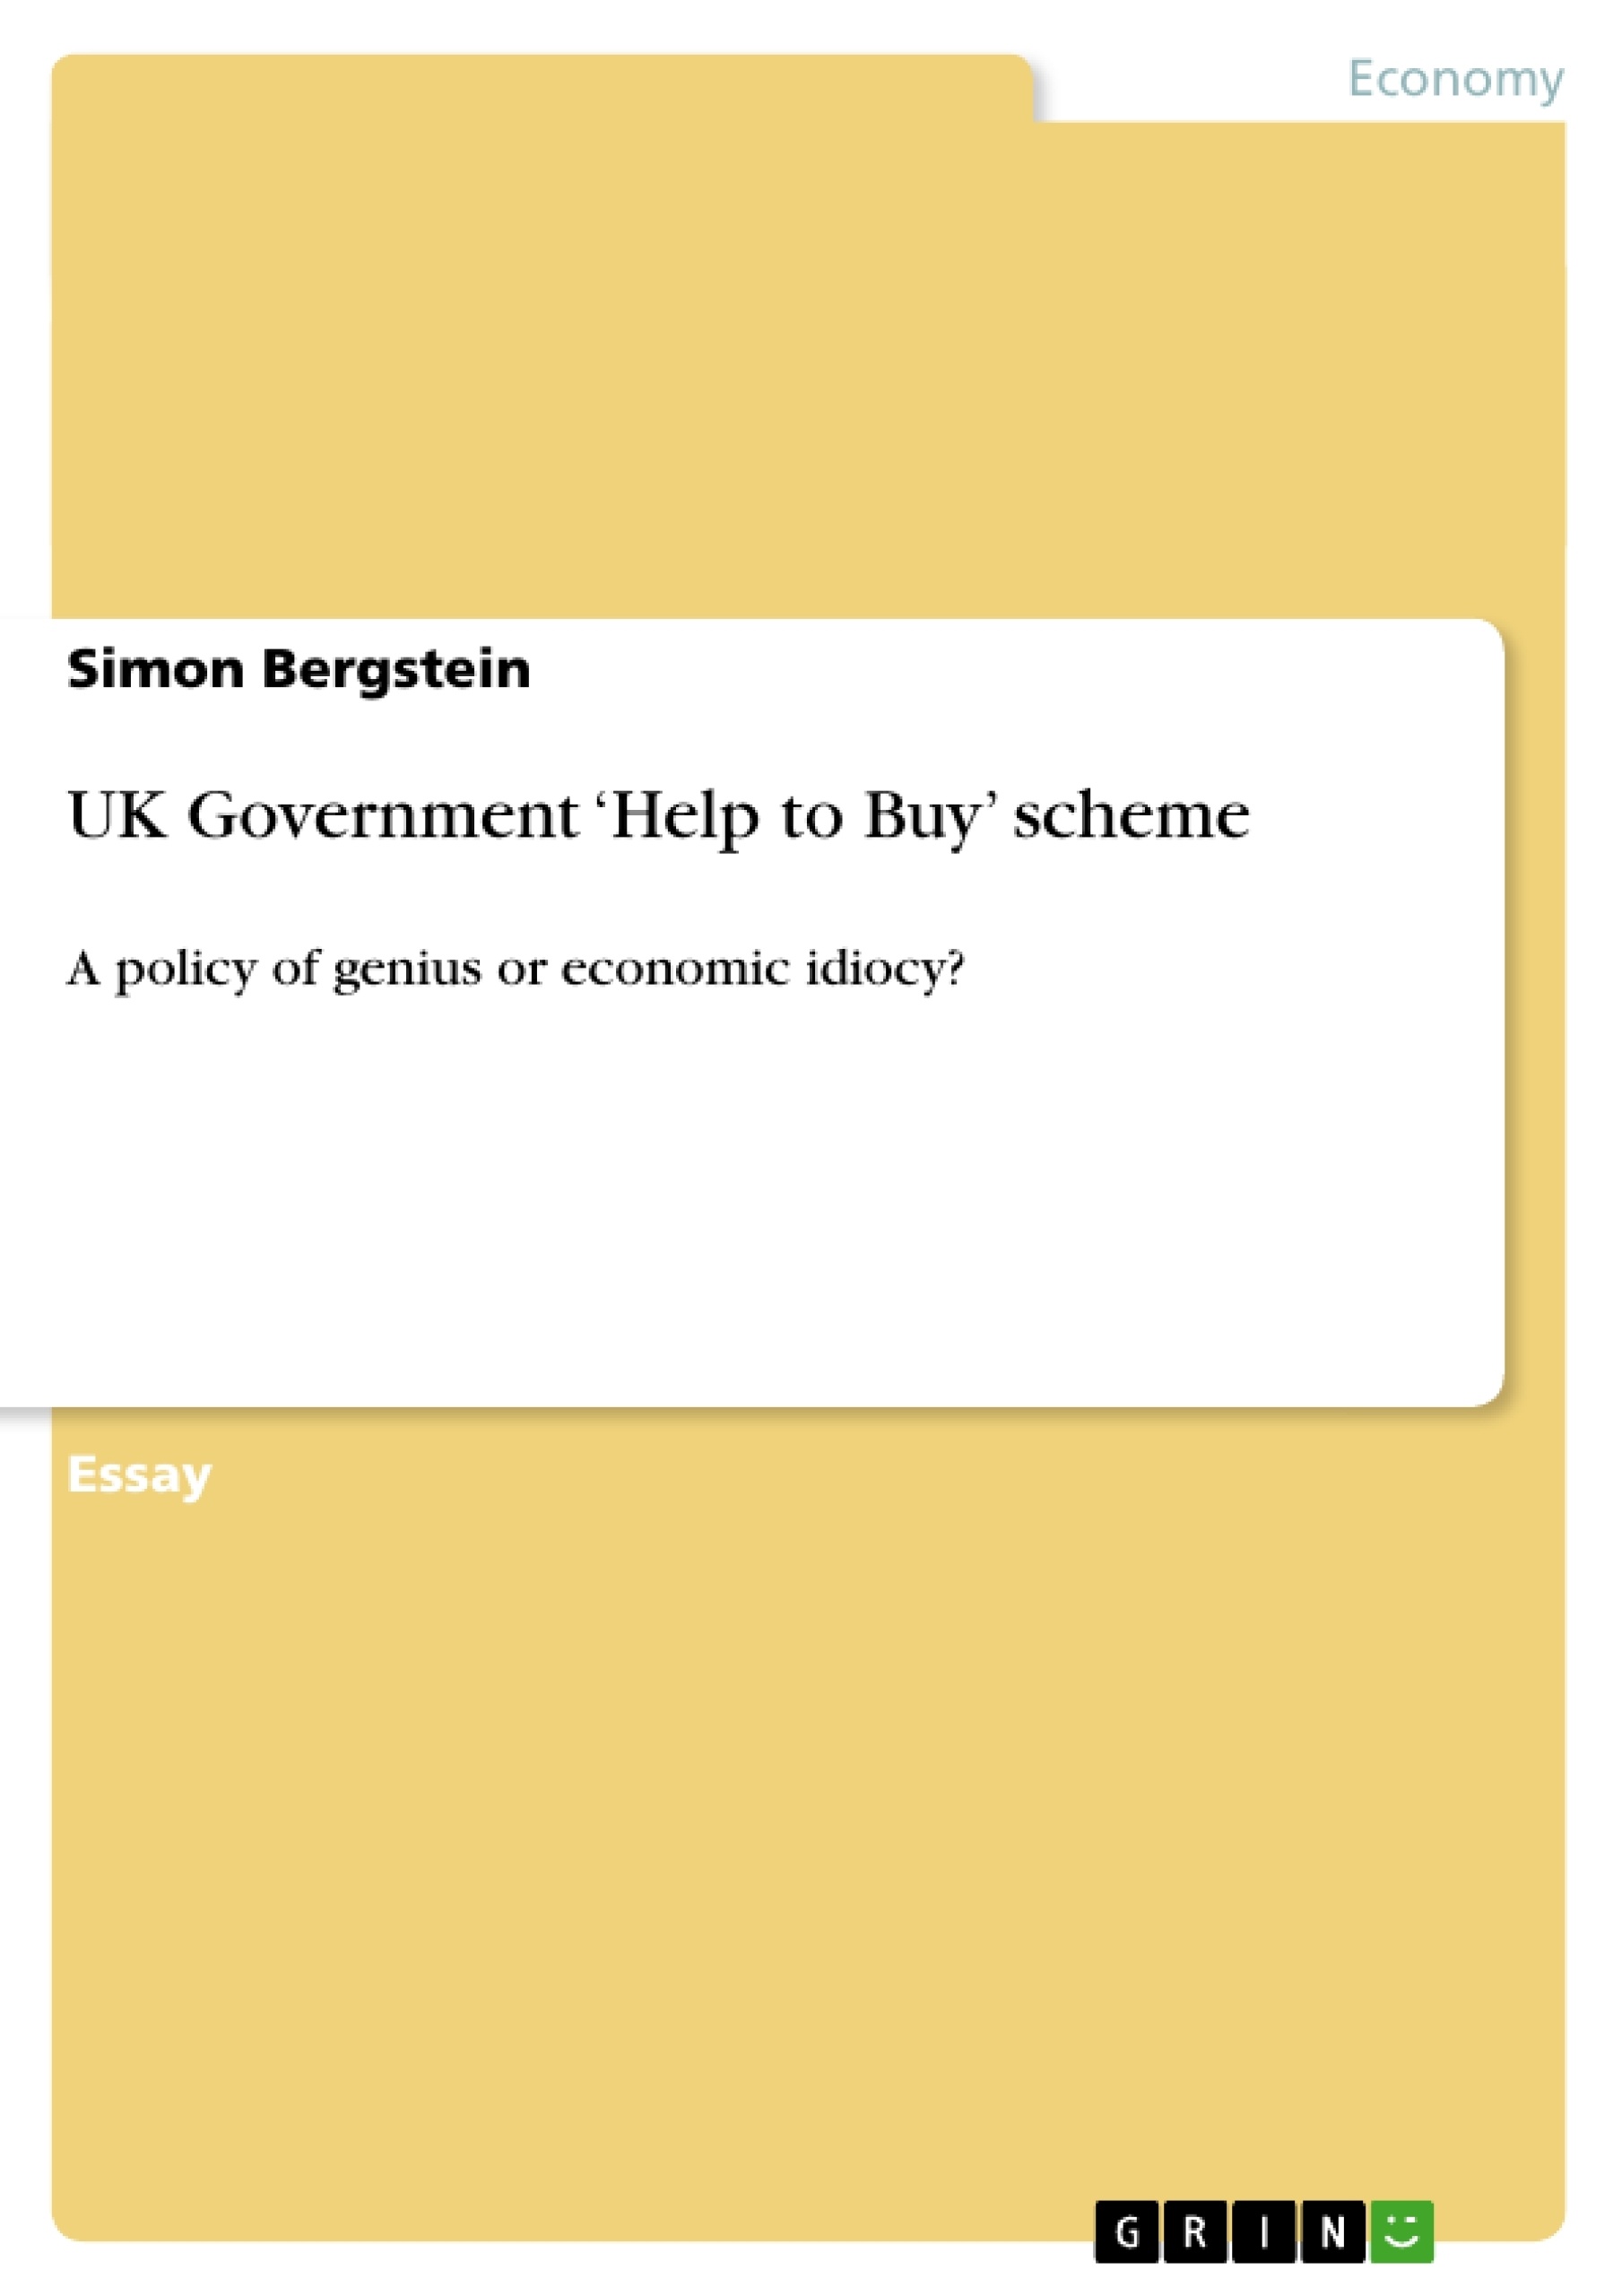 Title: UK Government ‘Help to Buy’ scheme